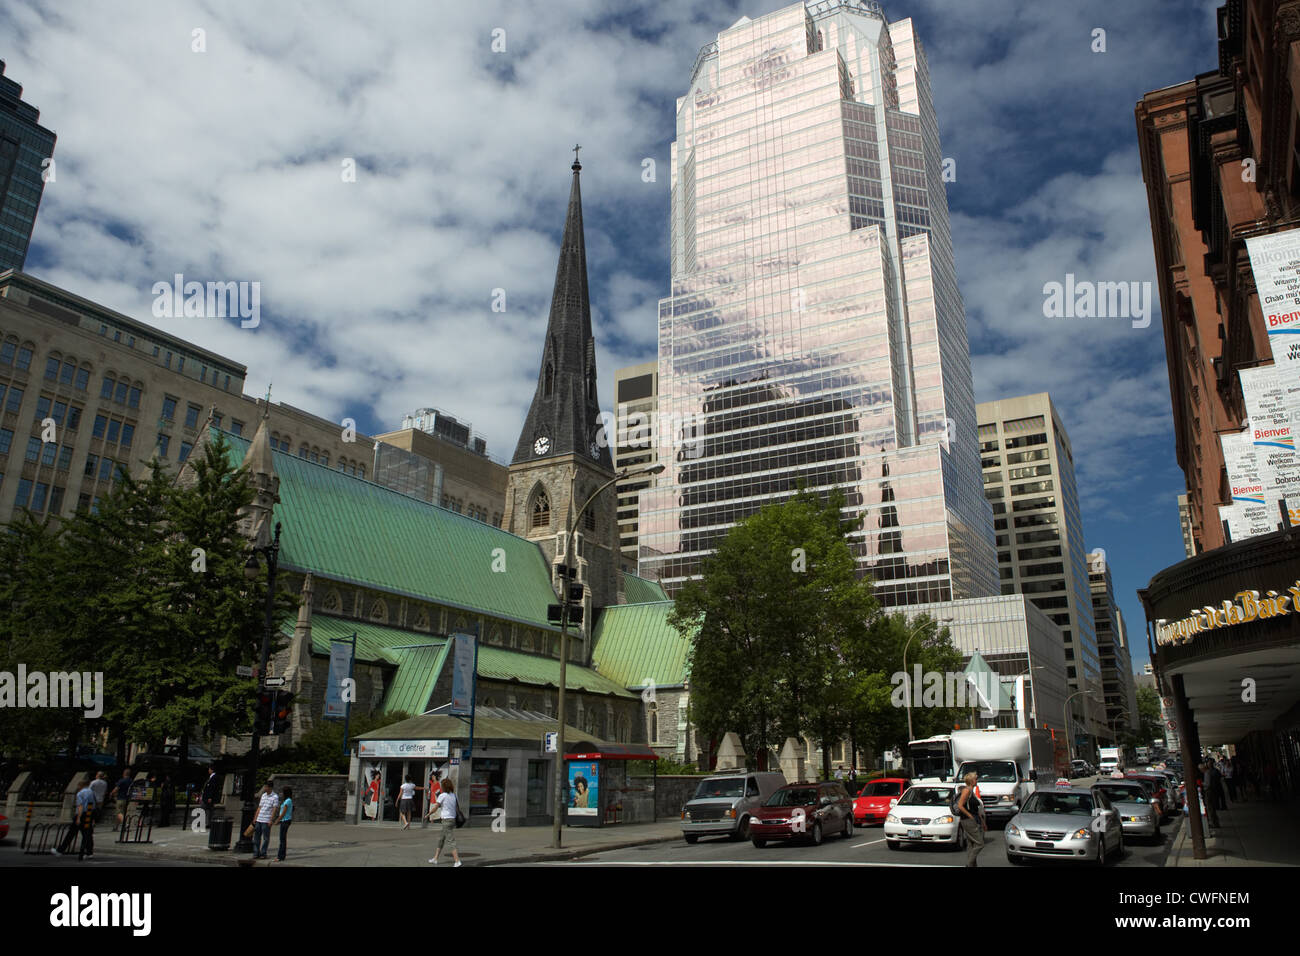 Montreal - The Christ Church Cathedral on Rue Sainte-Catherine Stock Photo